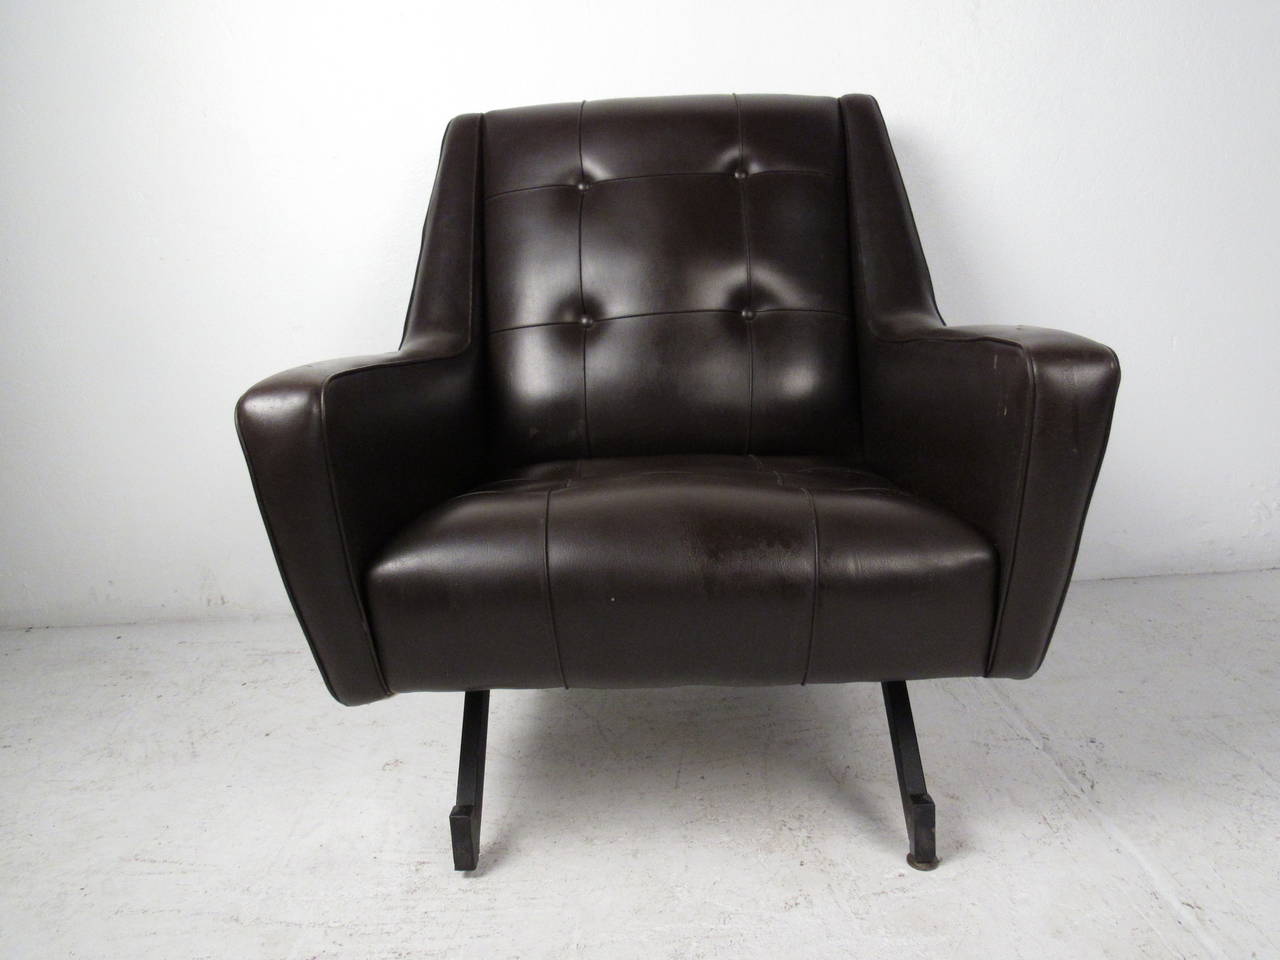 This midcentury lounge chair features chocolate brown tufted vinyl and iron legs which offer comfortable seating and a modern accent to any home or office space.

Please confirm item location (NY or NJ) with dealer.